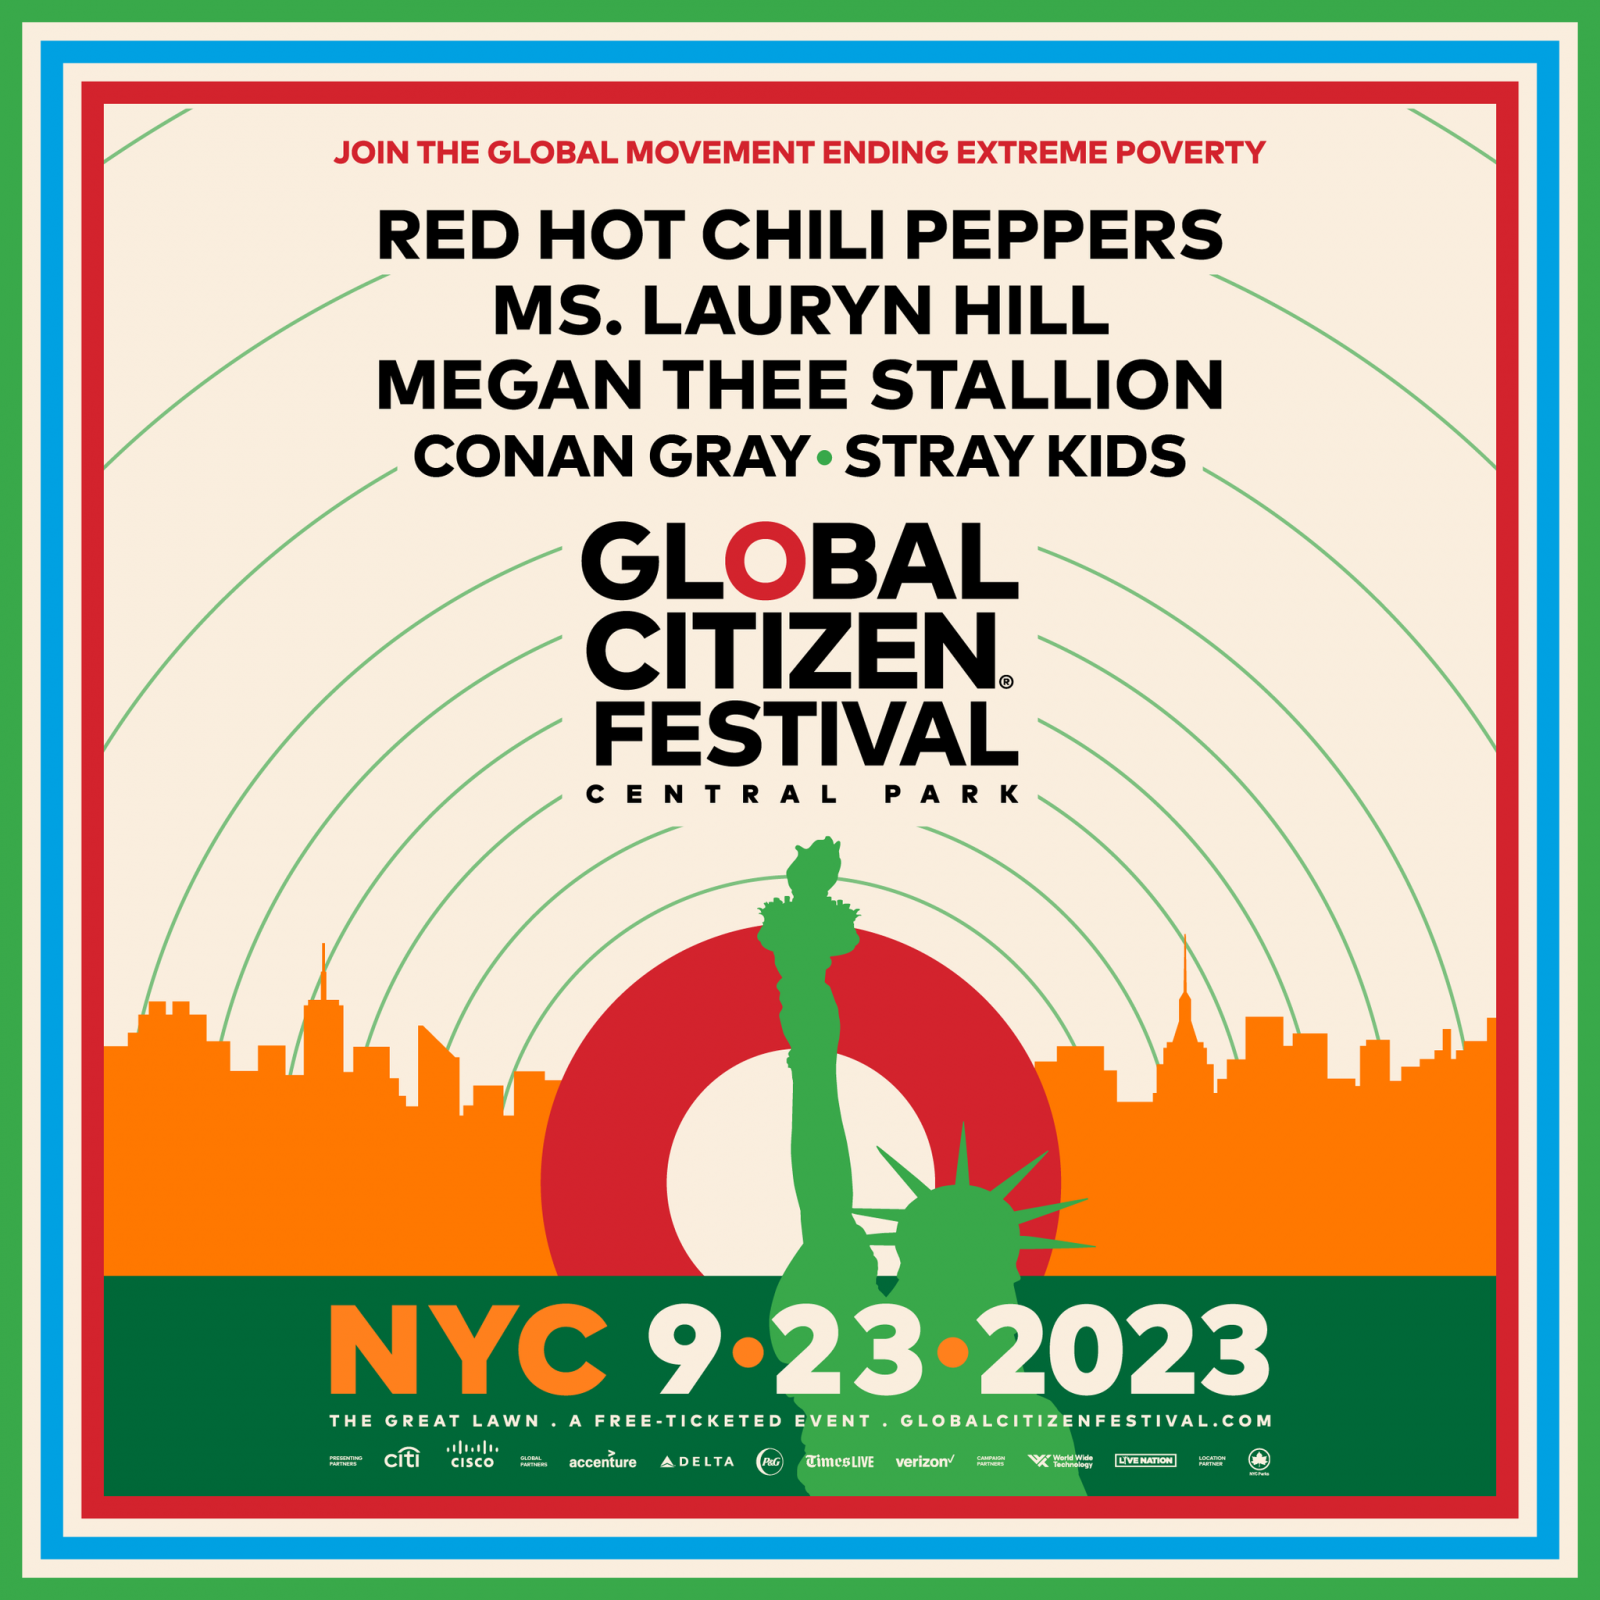 Global Citizen Festival 2023 How to Watch, Date, Venue, Lineup, and More